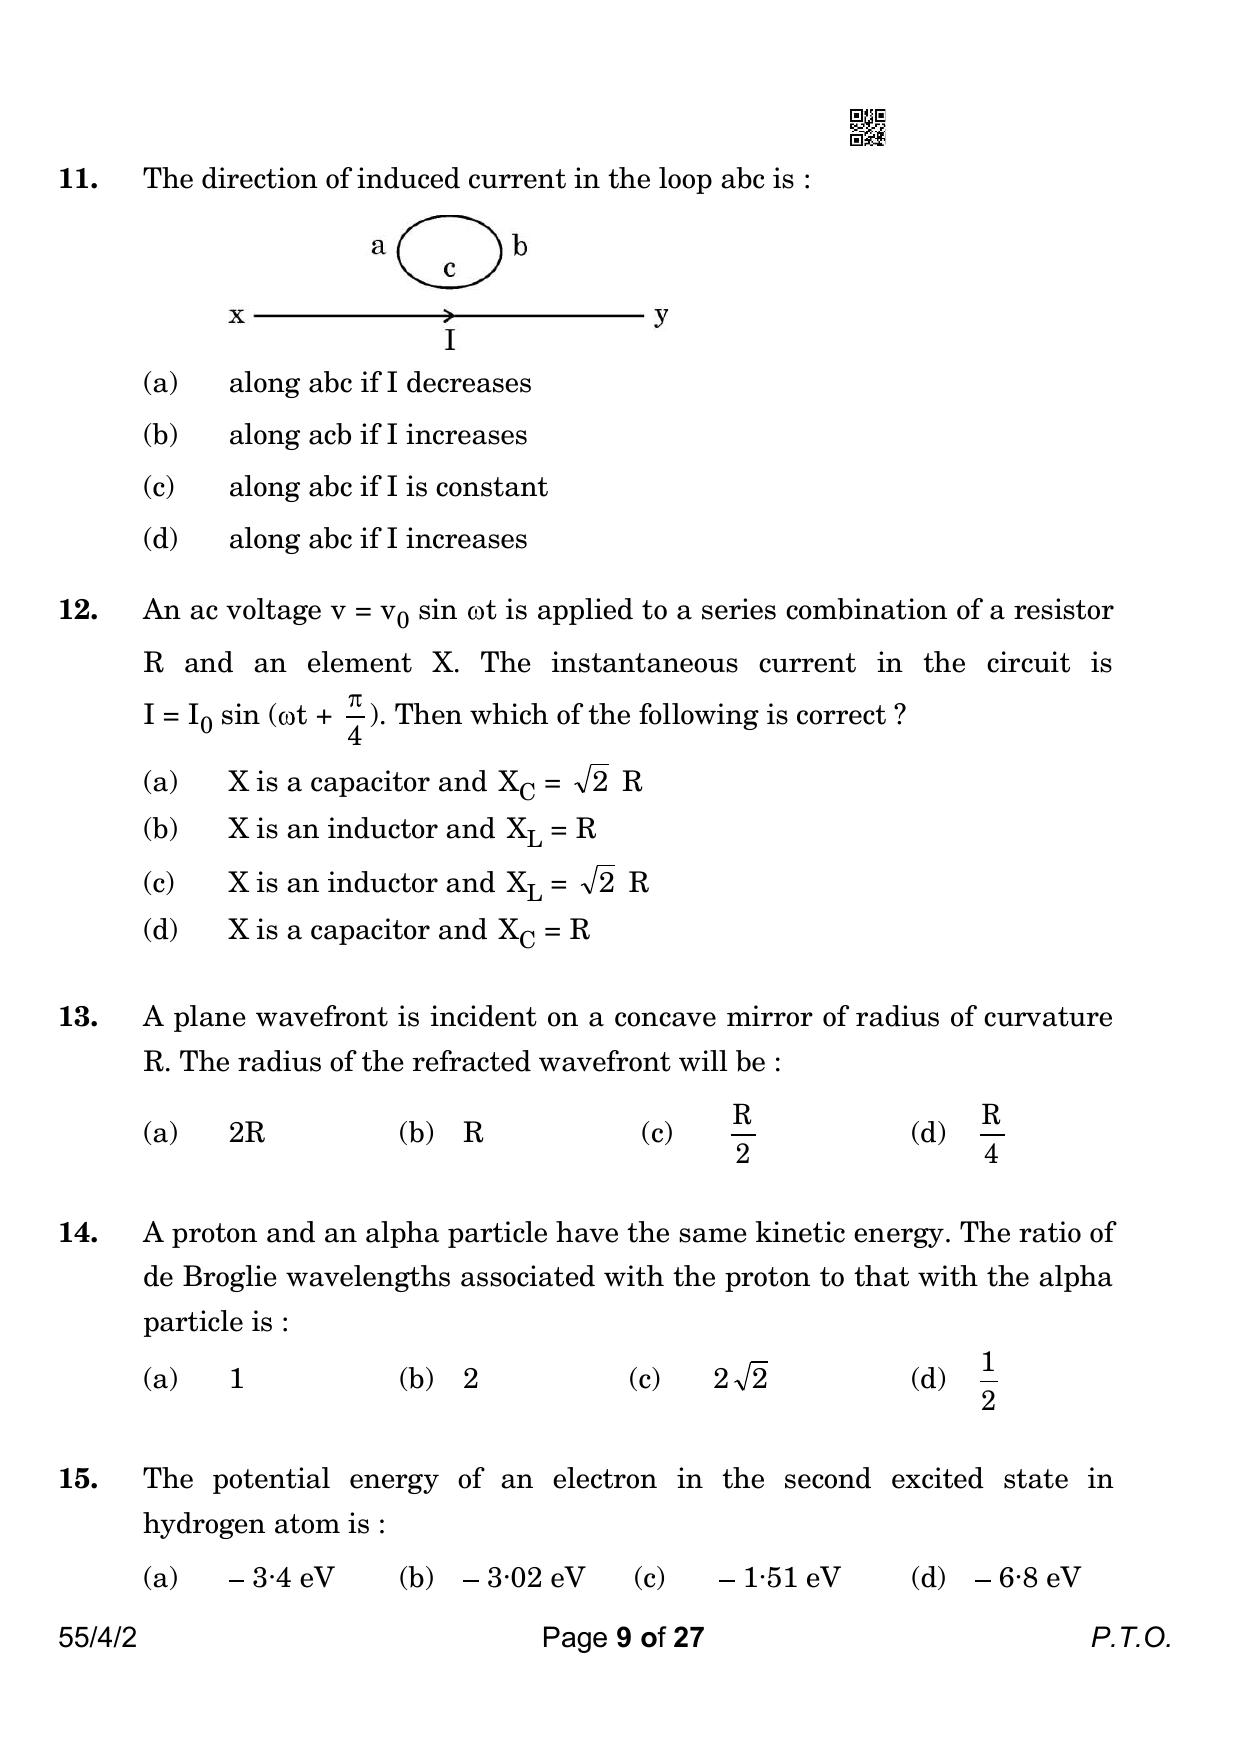 CBSE Class 12 55-4-2 Physics 2023 Question Paper - Page 9